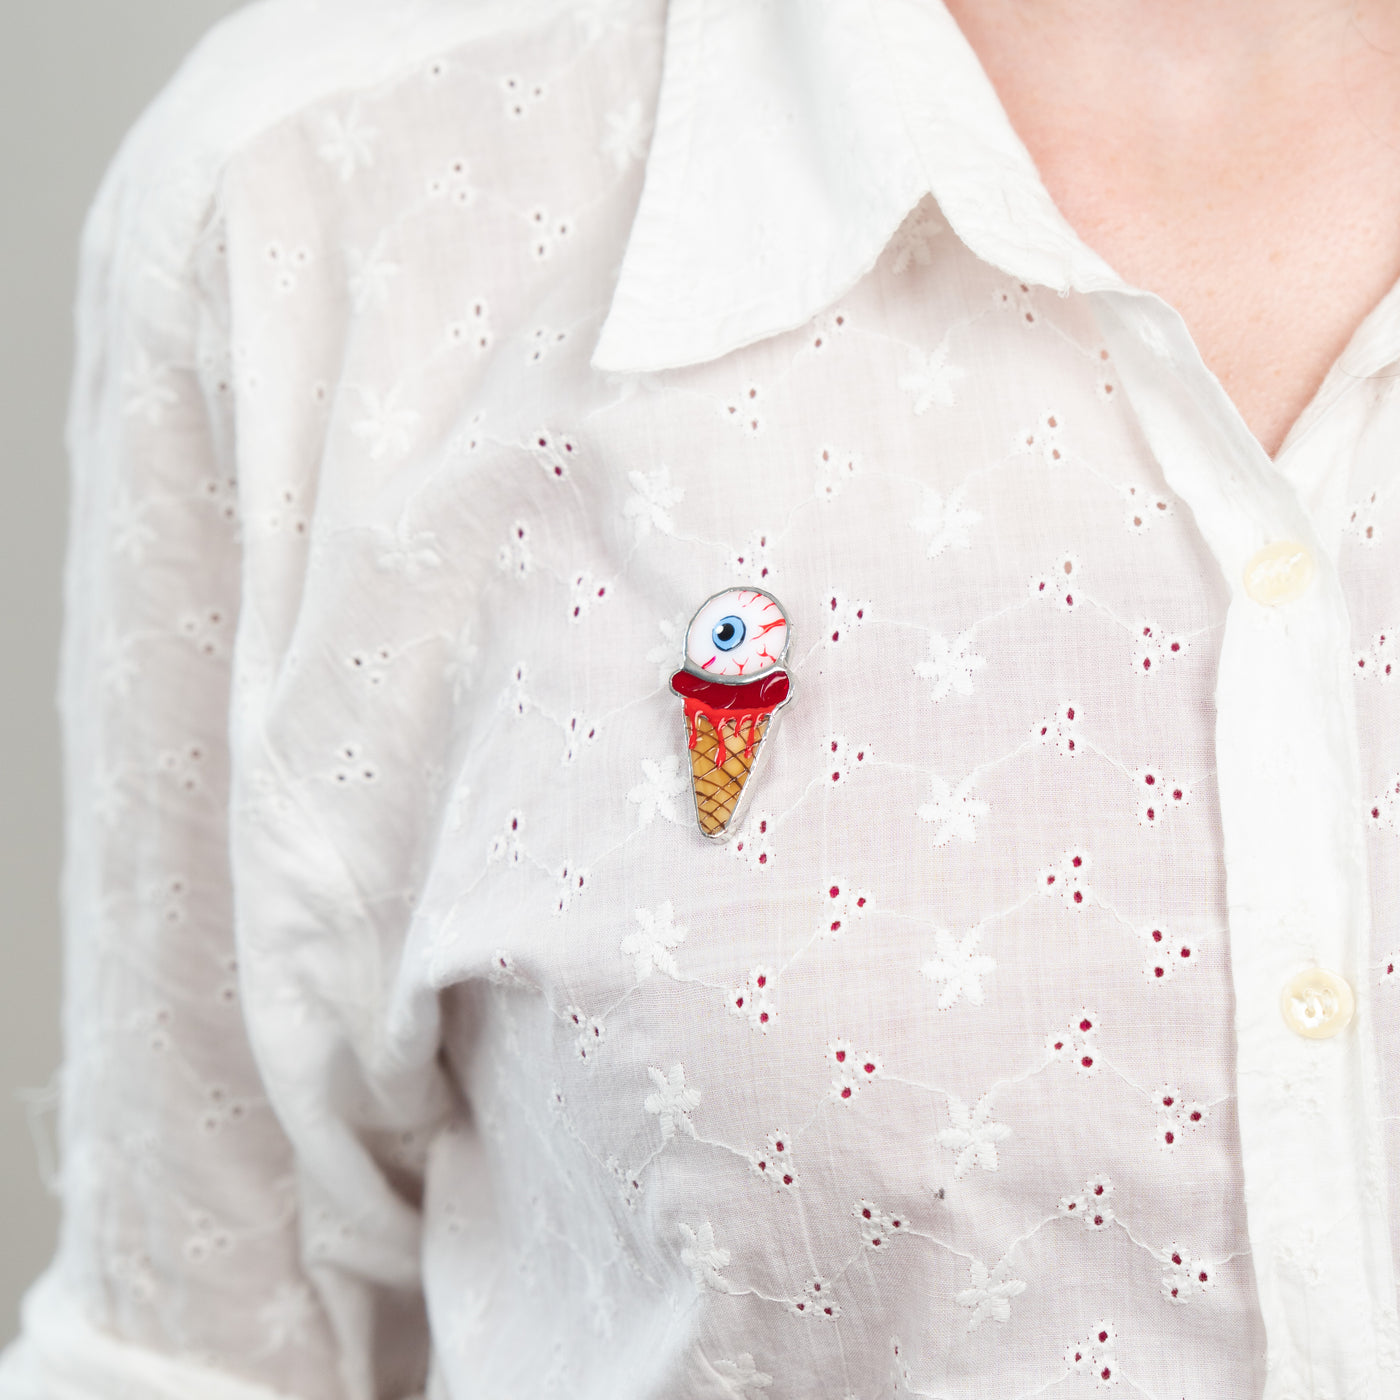 Ice-cream with the torn out eye brooch of stained glass on a white shirt